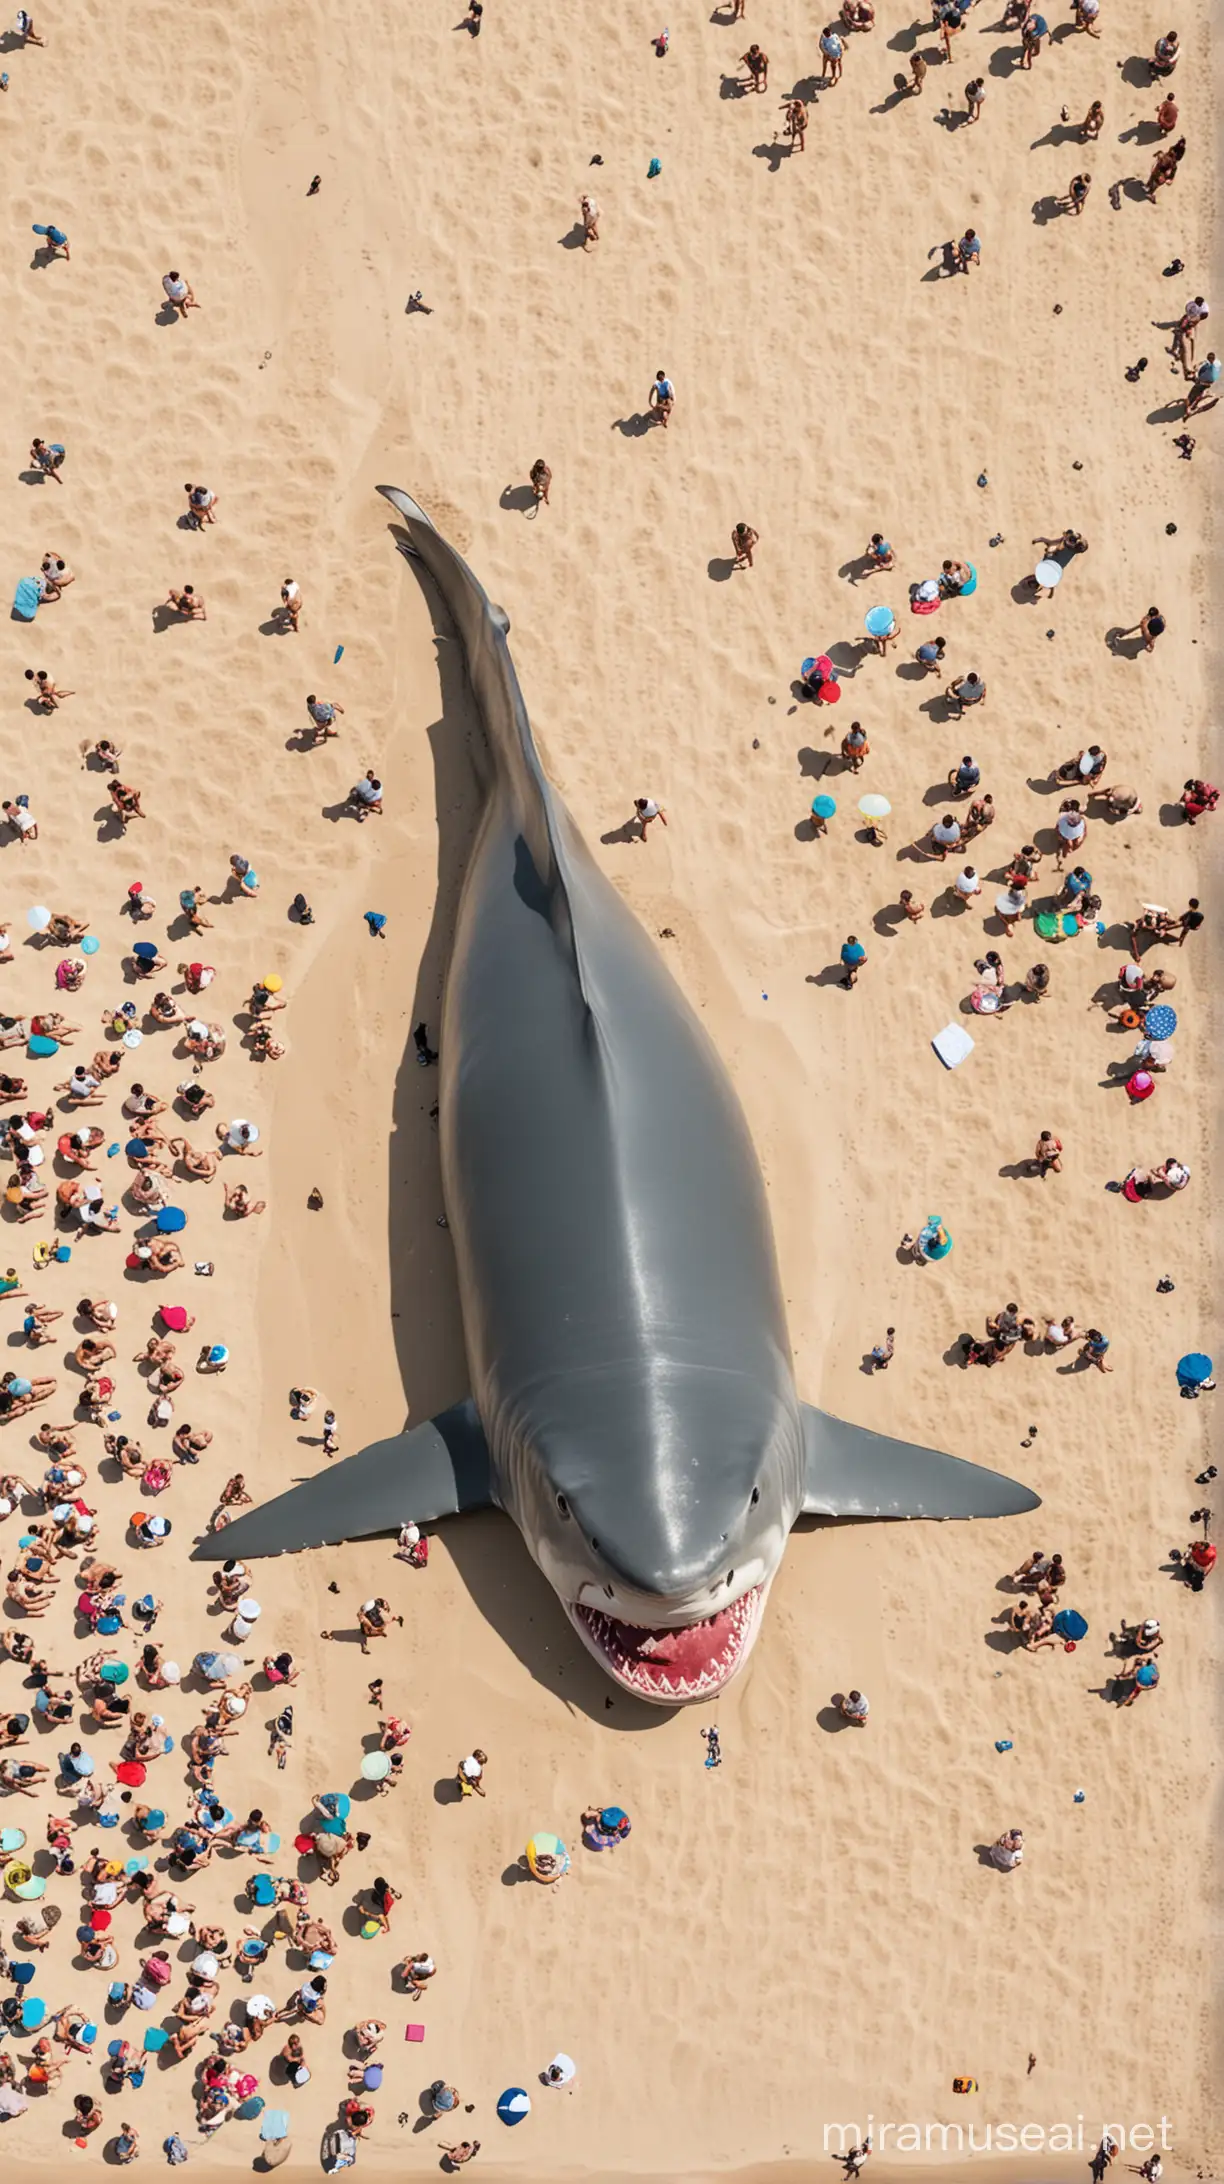 A big shark stranded on the beach, many people, seen from near